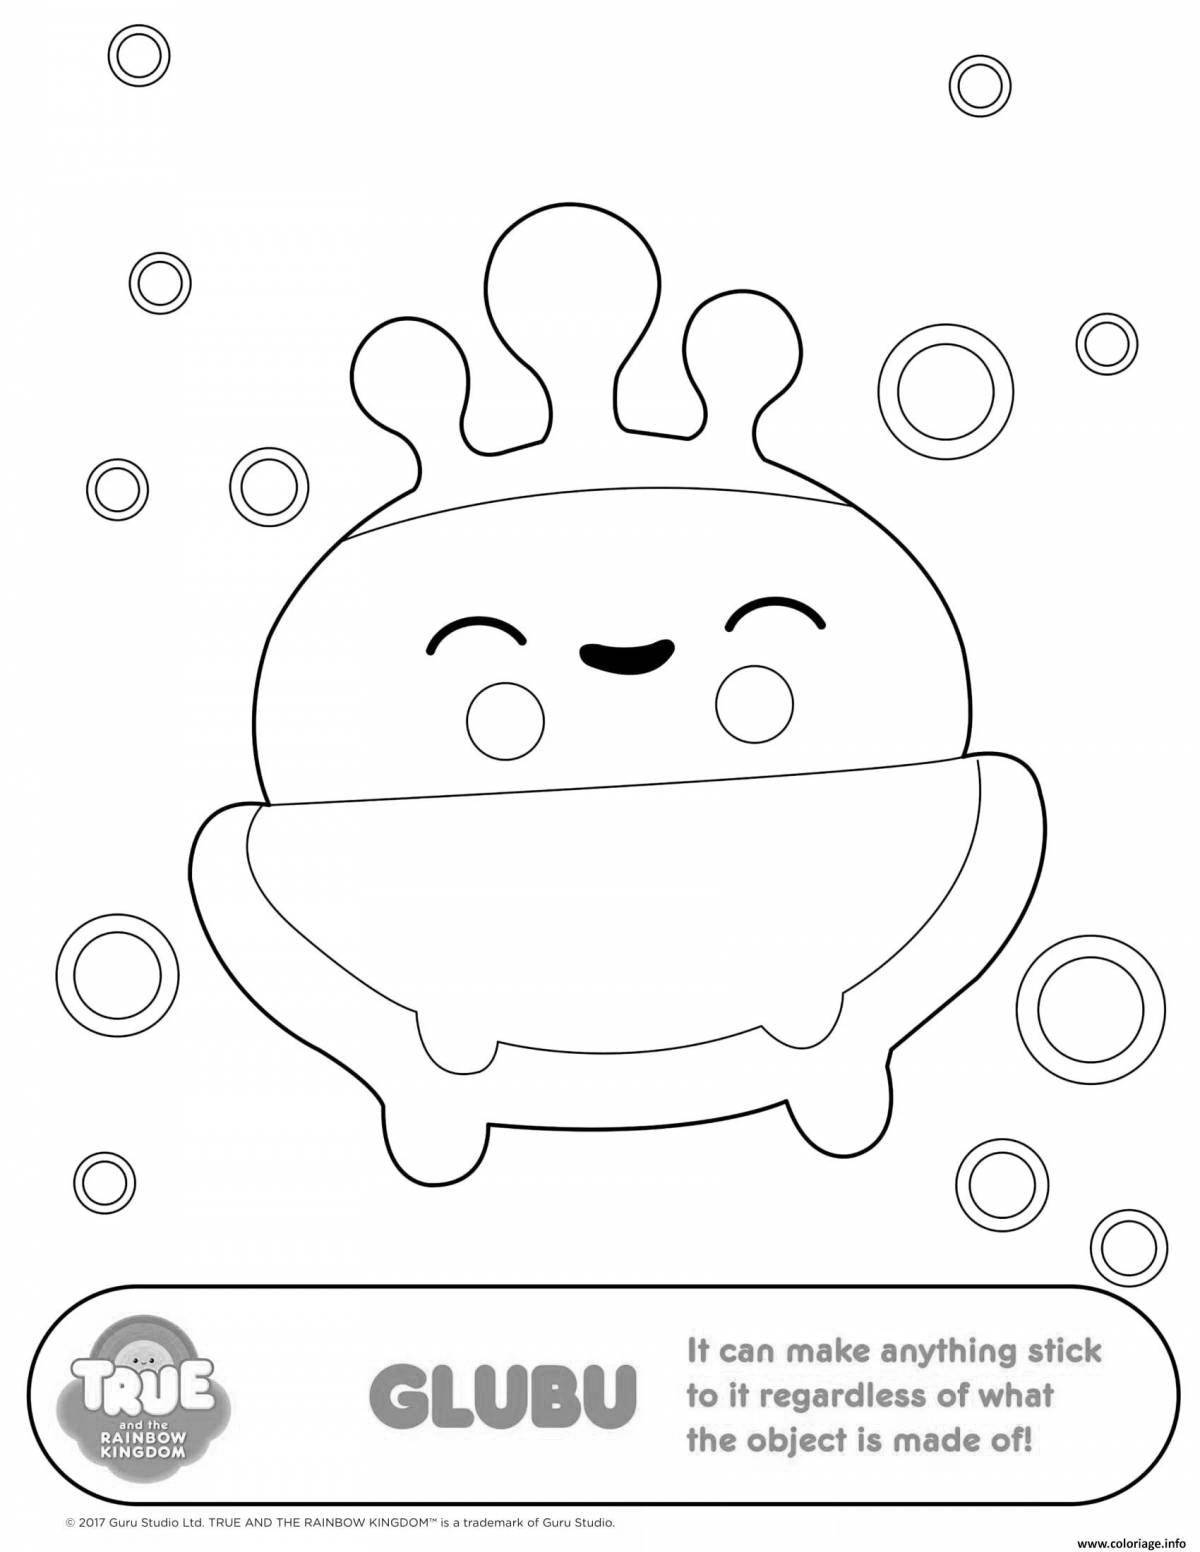 Gorgeous rainbow kingdom coloring page